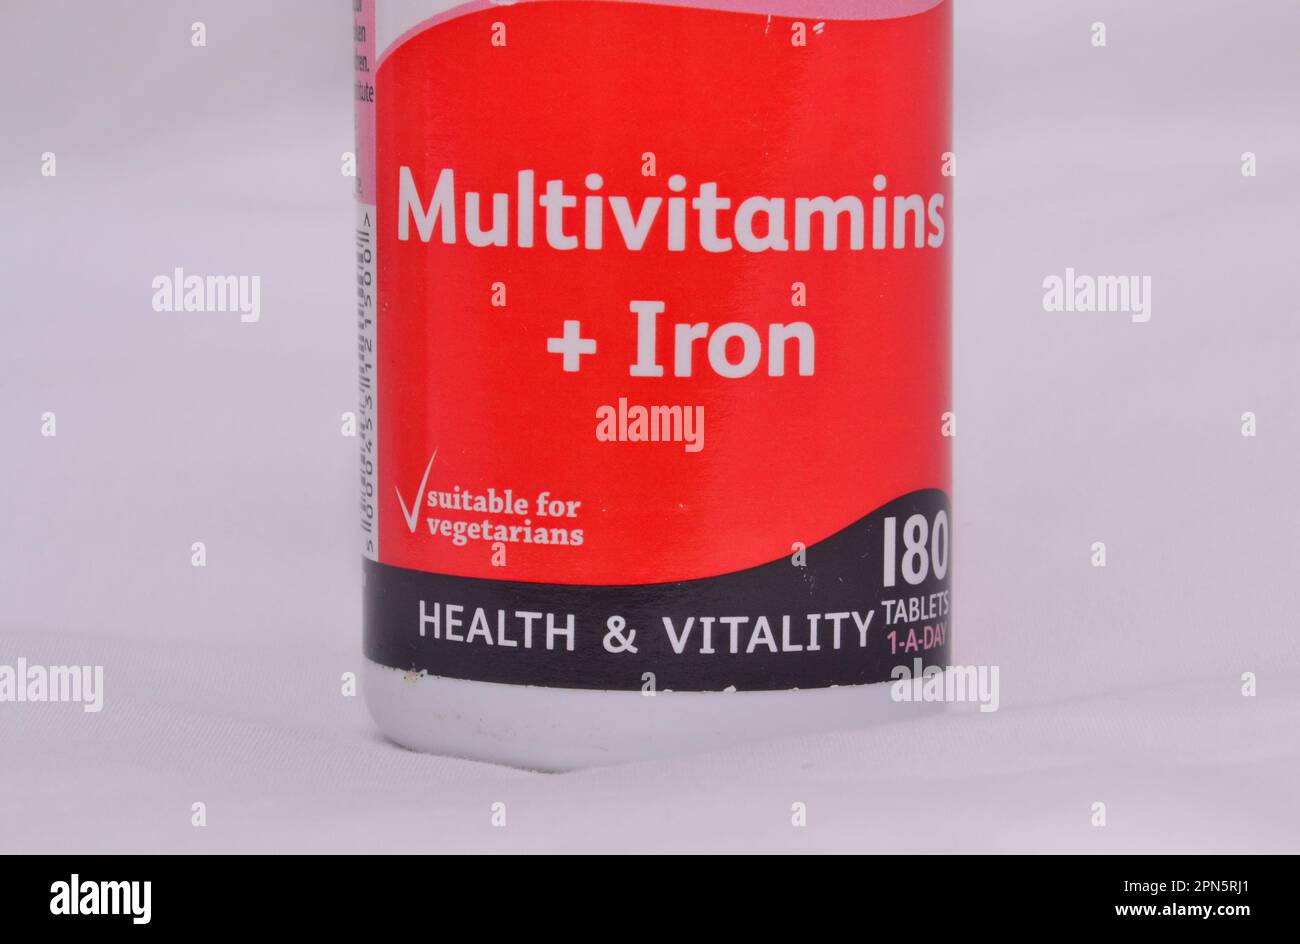 Stock image photo of a container of multivitamins and iron tablets with 'health and vitality' and 'suitable for vegetarians' text on it Stock Photo